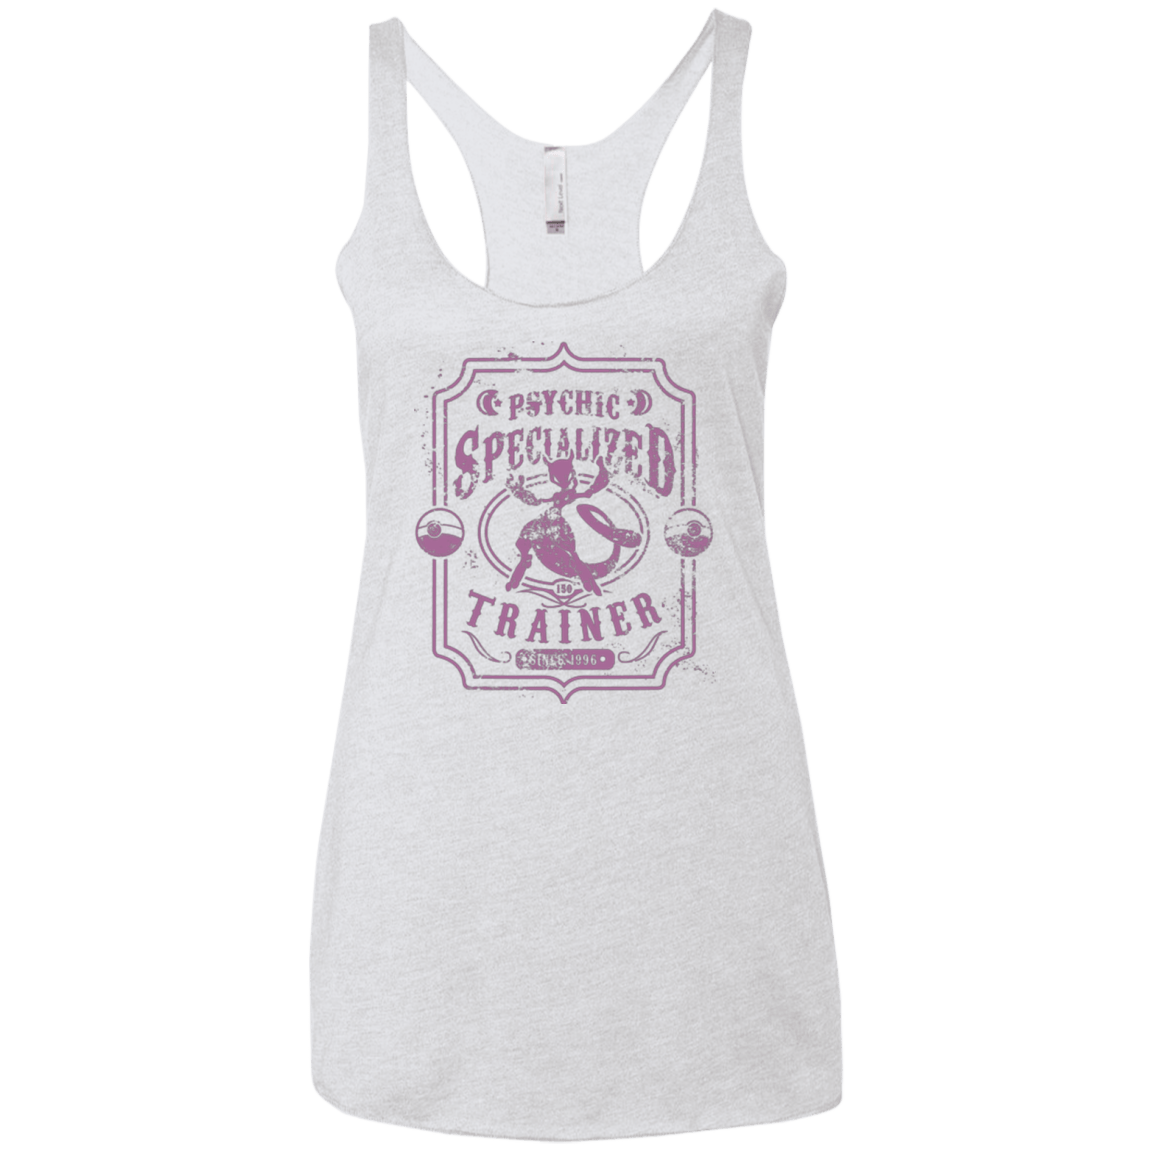 T-Shirts Heather White / X-Small Psychic Specialized Trainer 2 Women's Triblend Racerback Tank